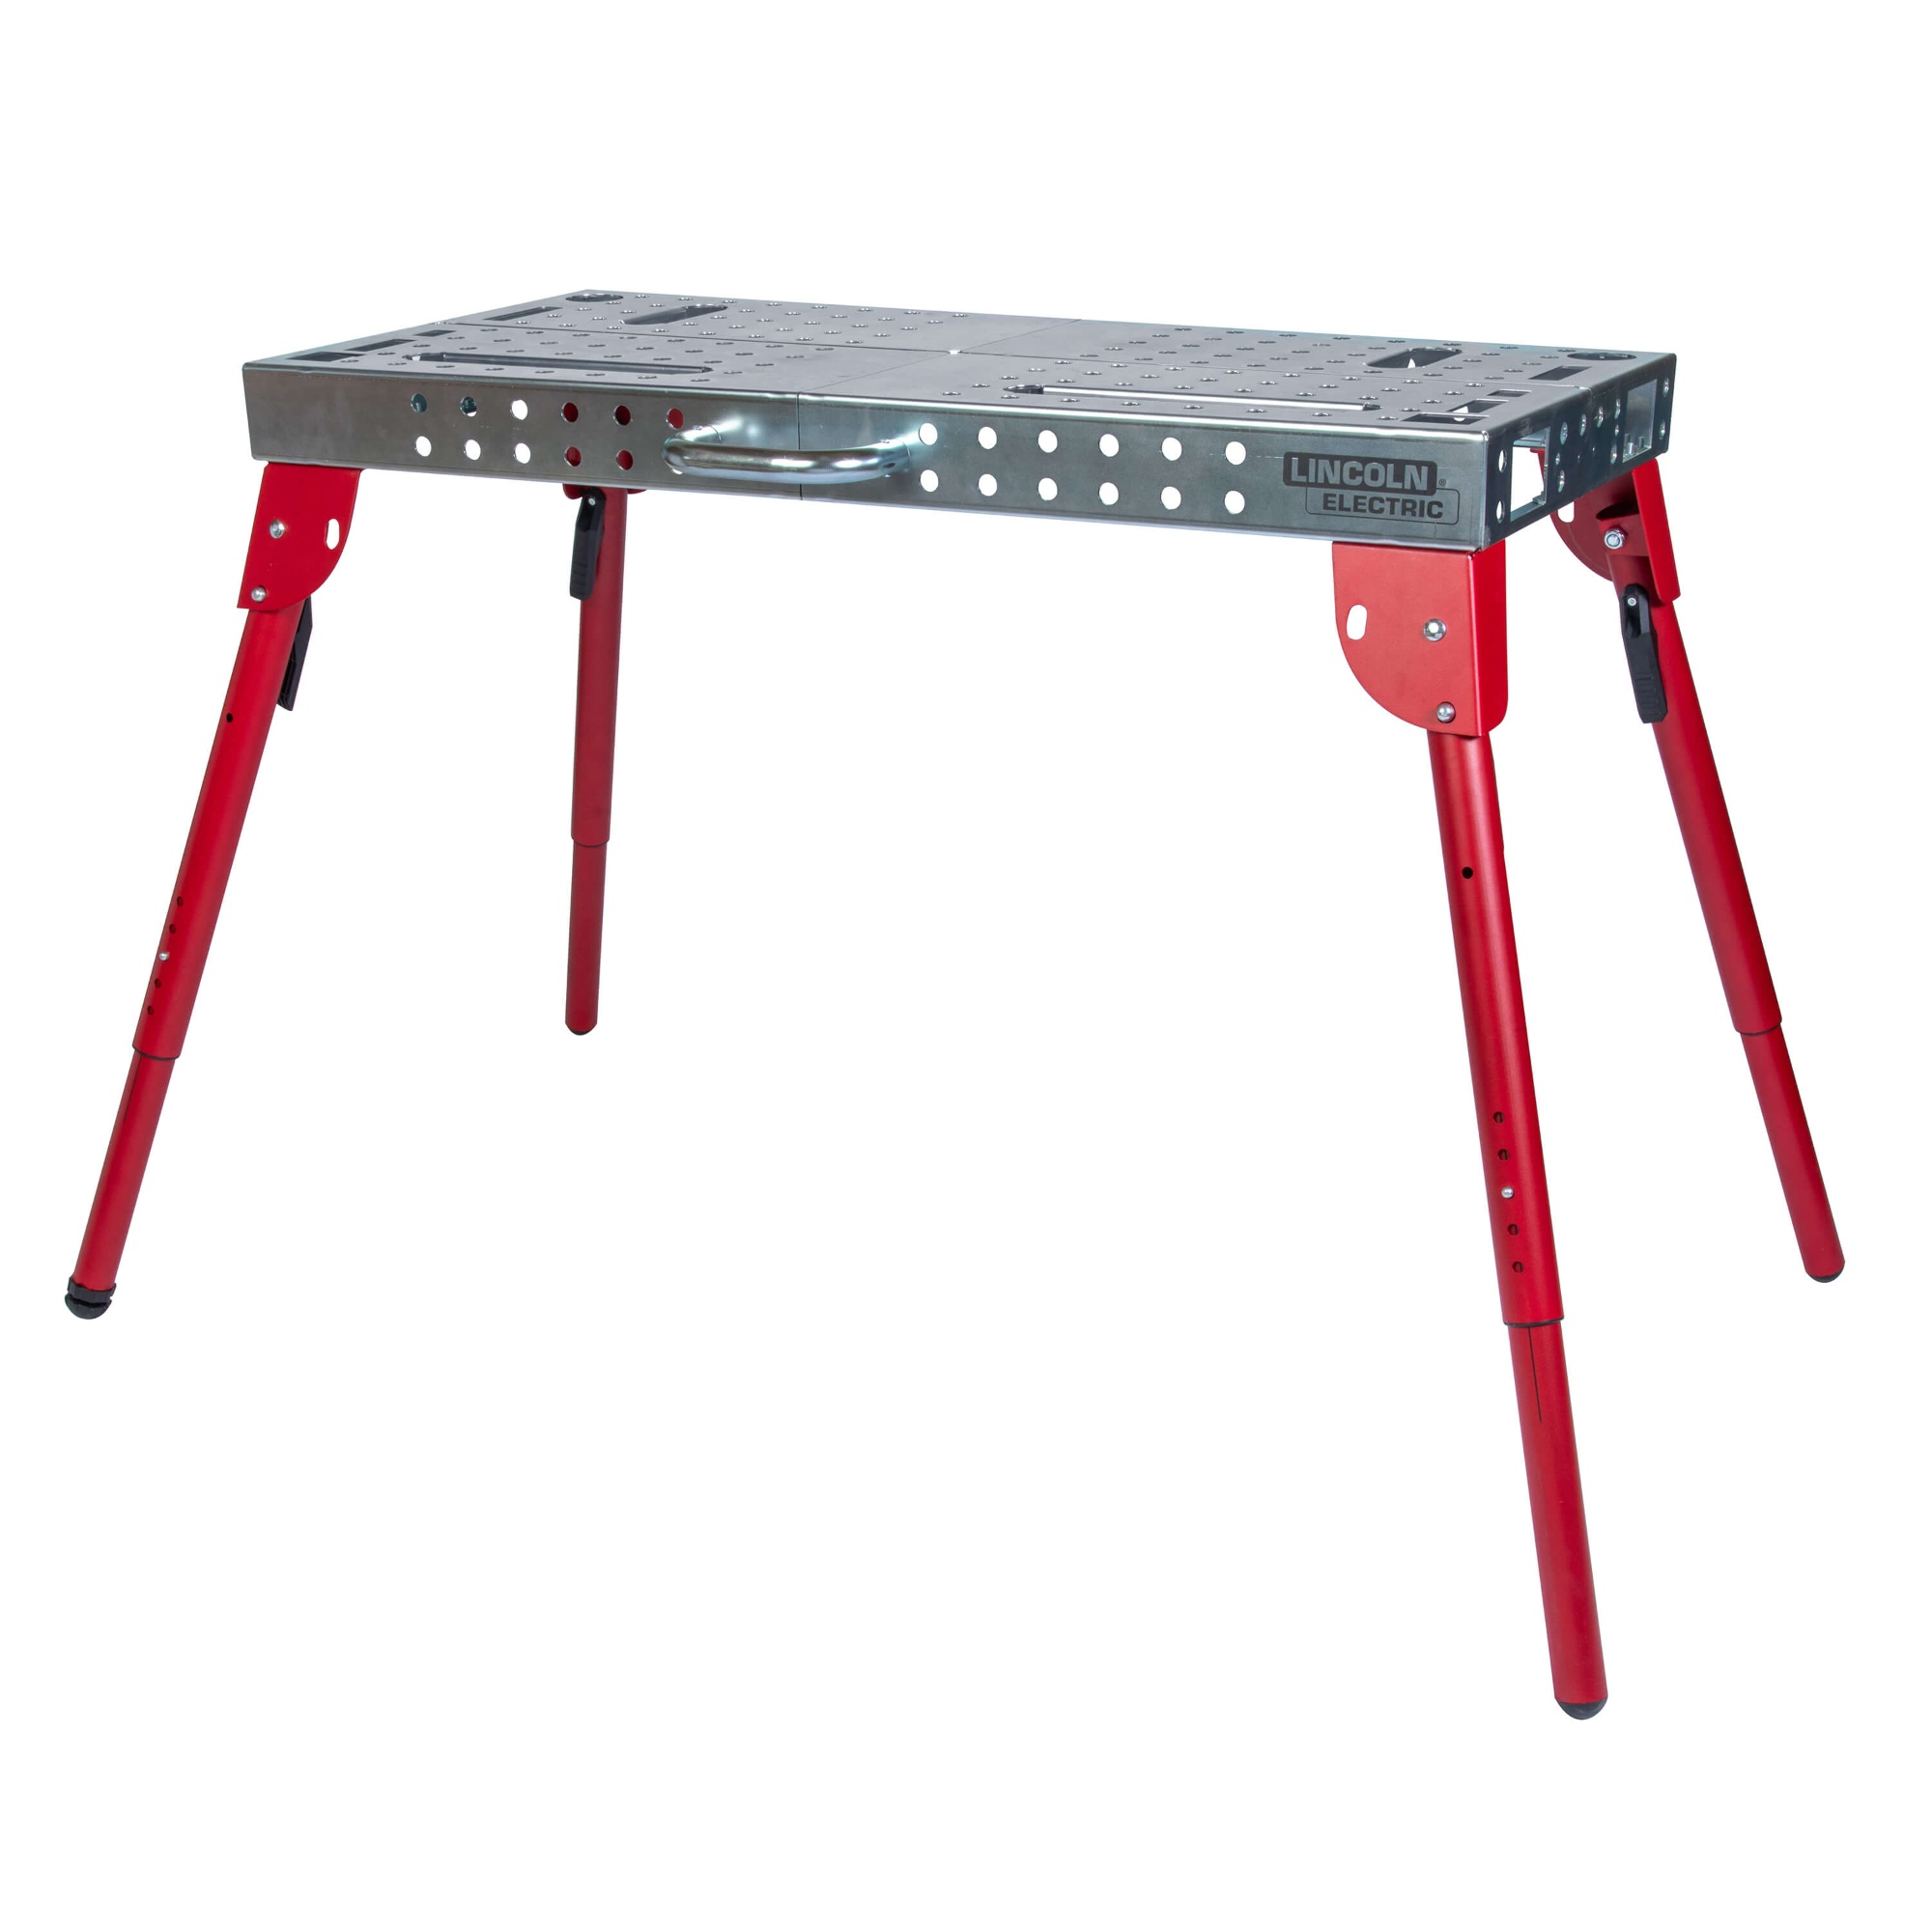 Lincoln Electric Portable Welding Table and Workbench #K5334-1